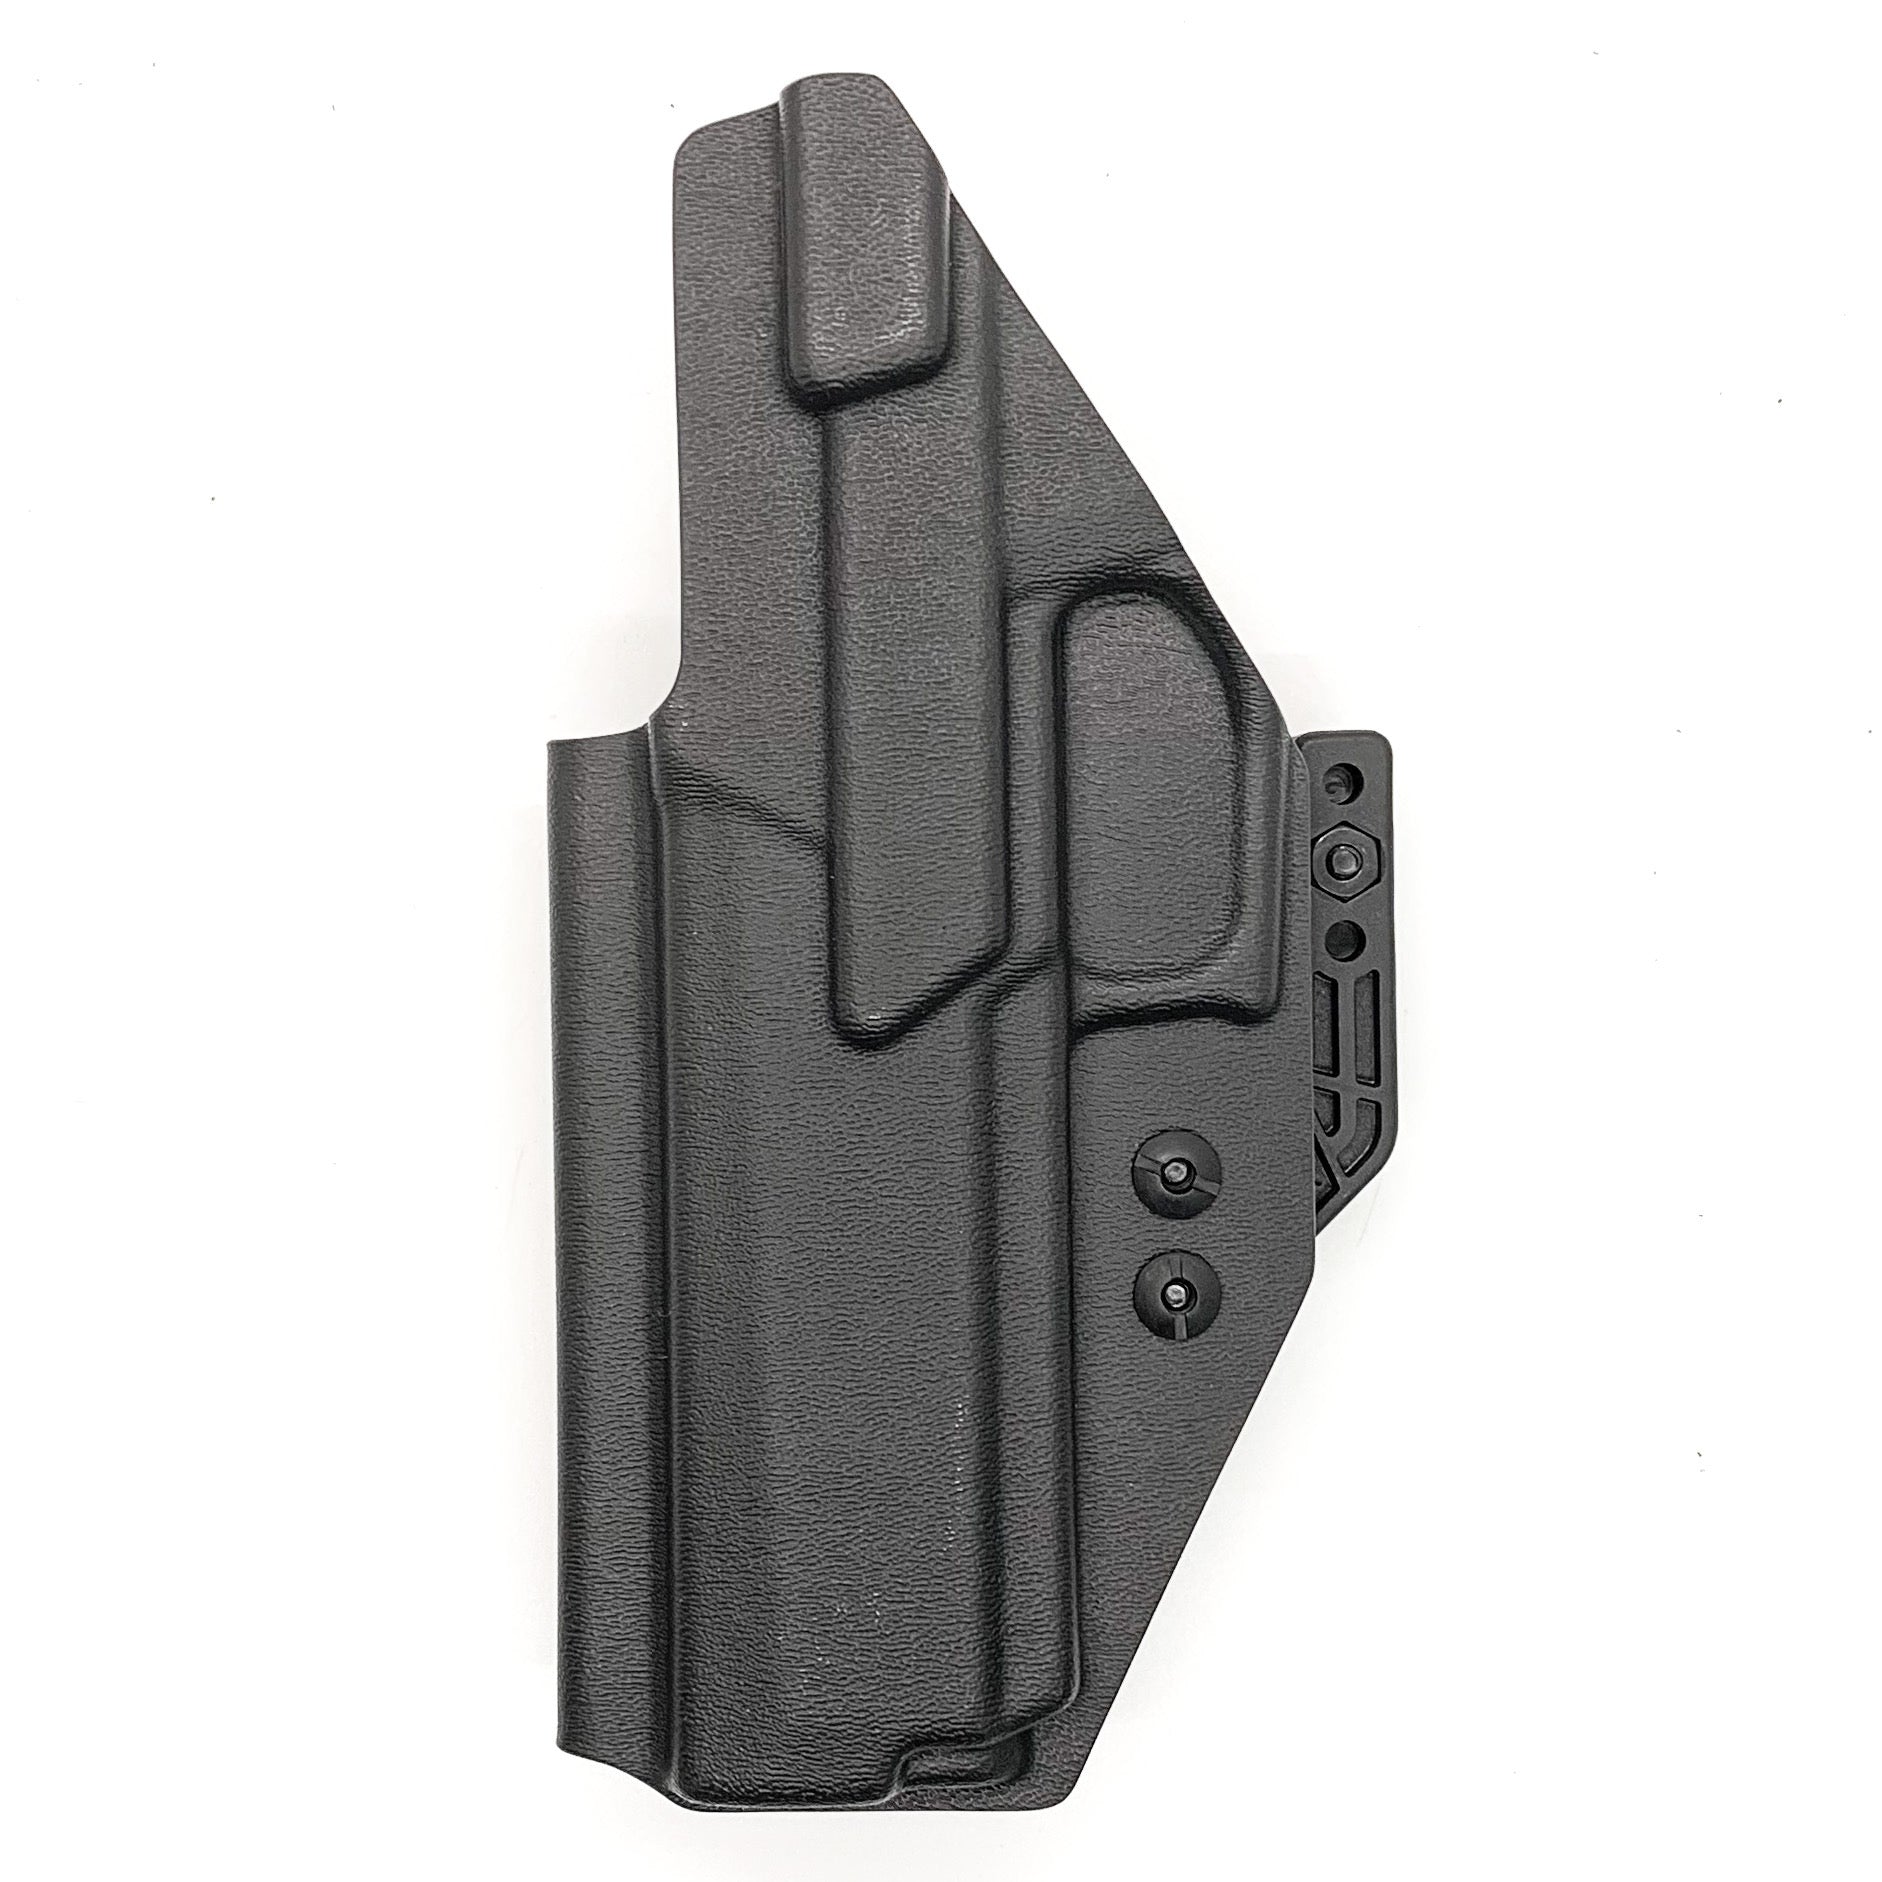 For the best inside Waistband Kydex holster designed to fit the Sig Sauer P320 Full size and M17 pistols shop Four Brothers Holsters. Full sweatguard, adjustable retention, adjustable ride height, and cant.  Minimal material, smooth edges to reduce printing, accommodates most red dot sights.  Proudly made in the USA.